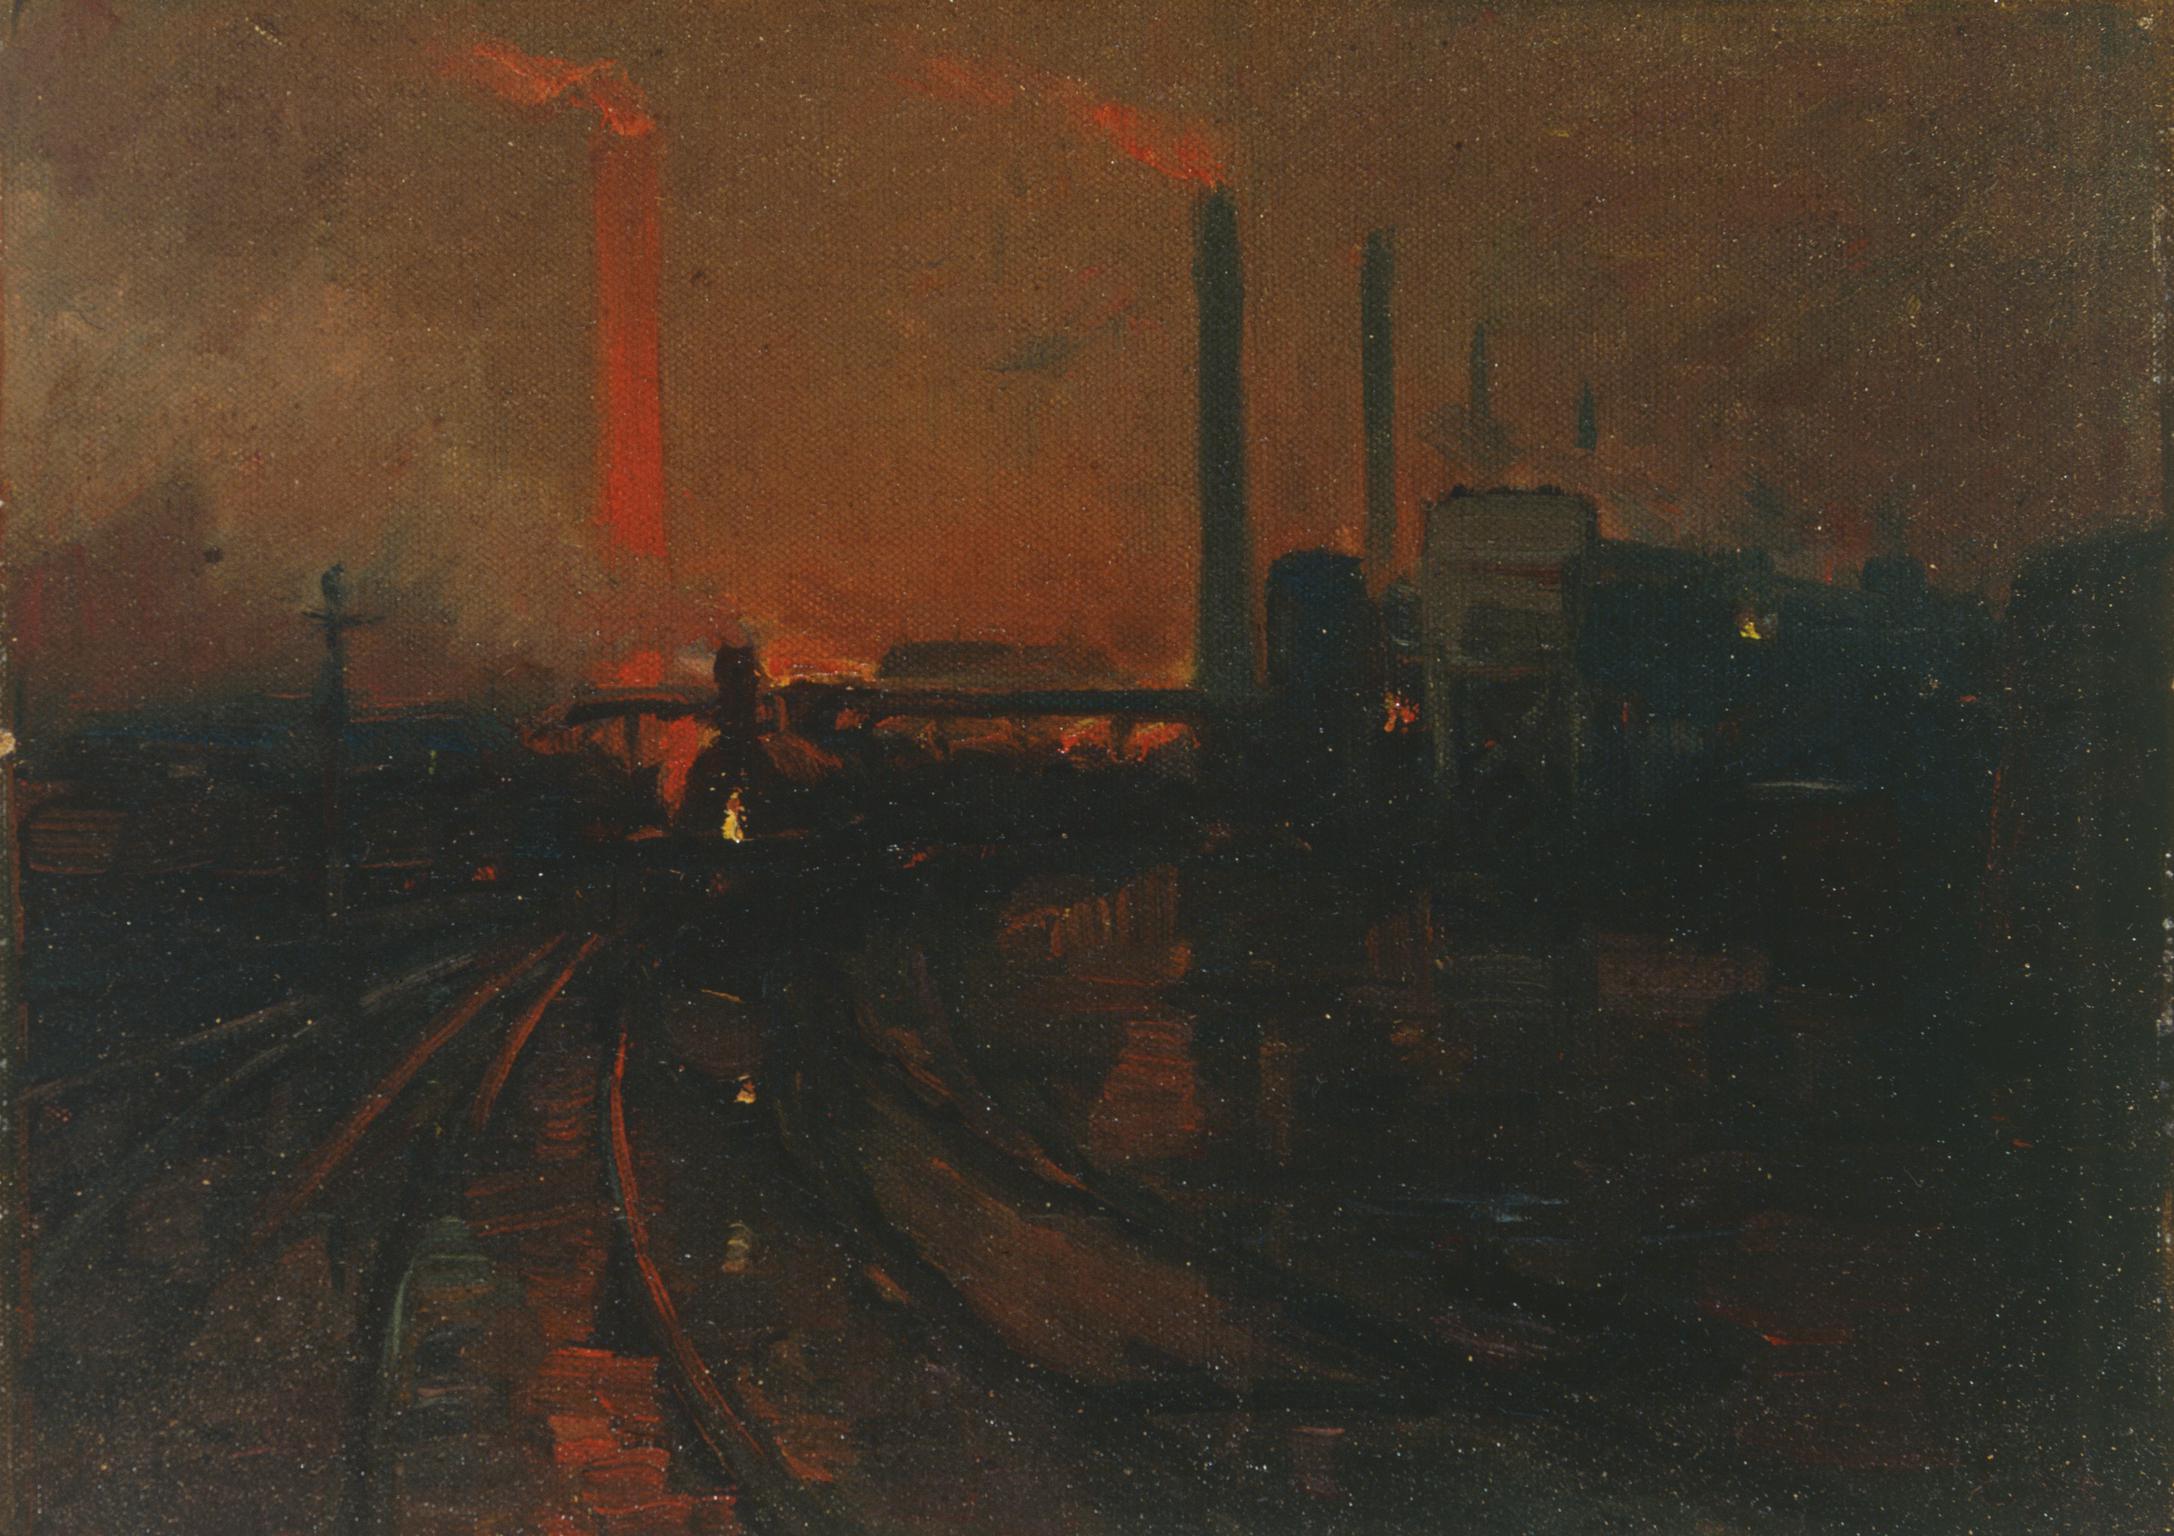 Steel works, Cardiff at night